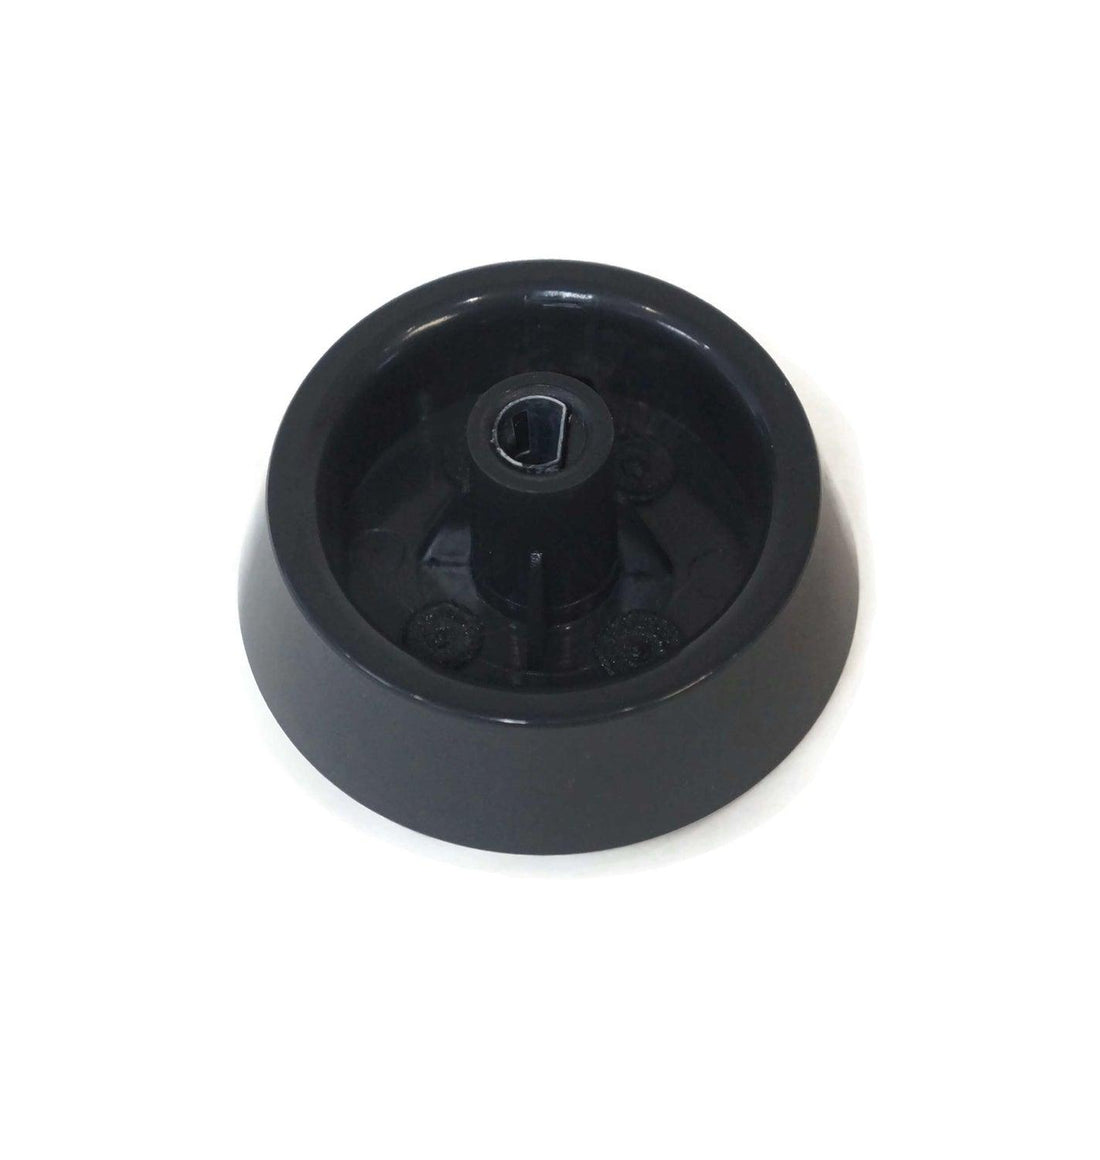 WE01X30638 GE Laundry Center Knob - Back View